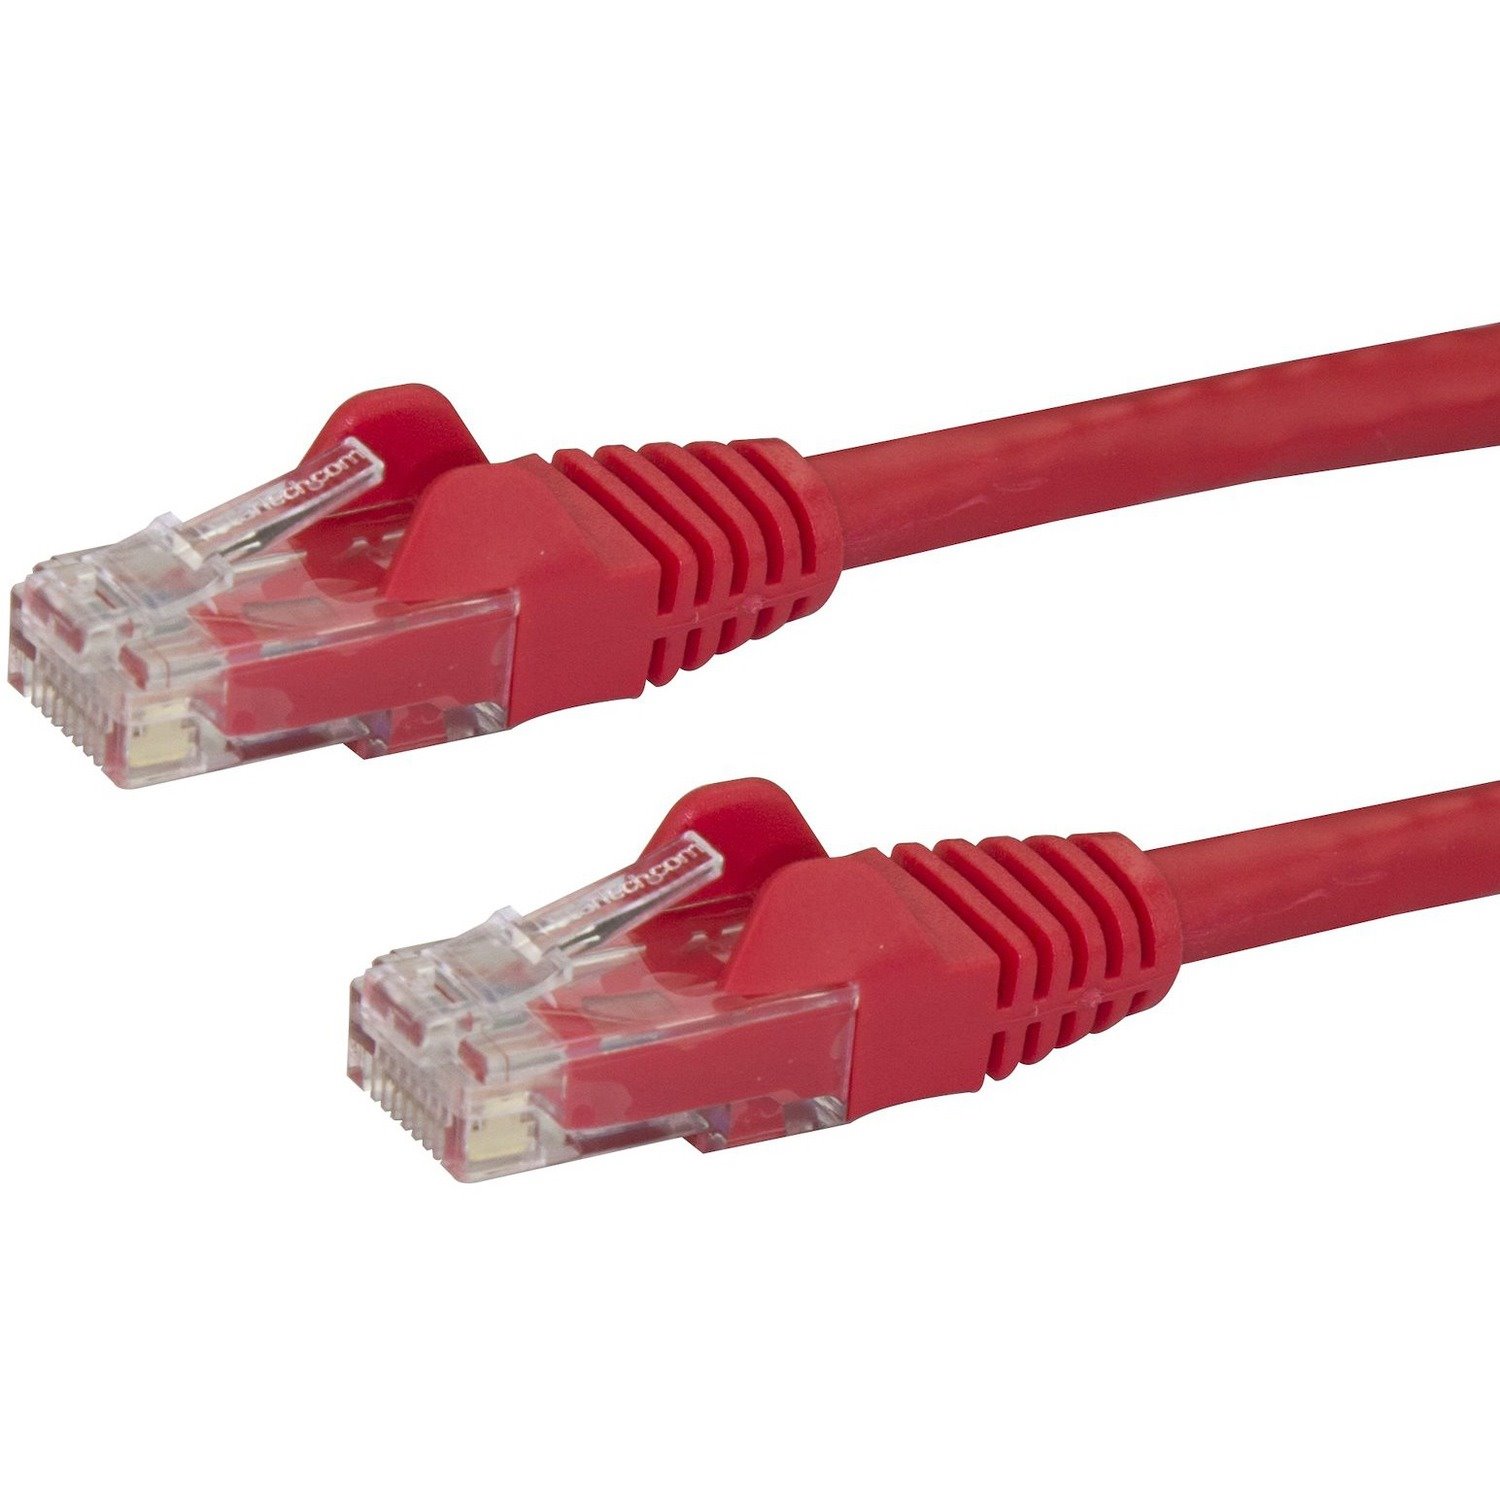 StarTech.com 1ft CAT6 Ethernet Cable - Red Snagless Gigabit - 100W PoE UTP 650MHz Category 6 Patch Cord UL Certified Wiring/TIA